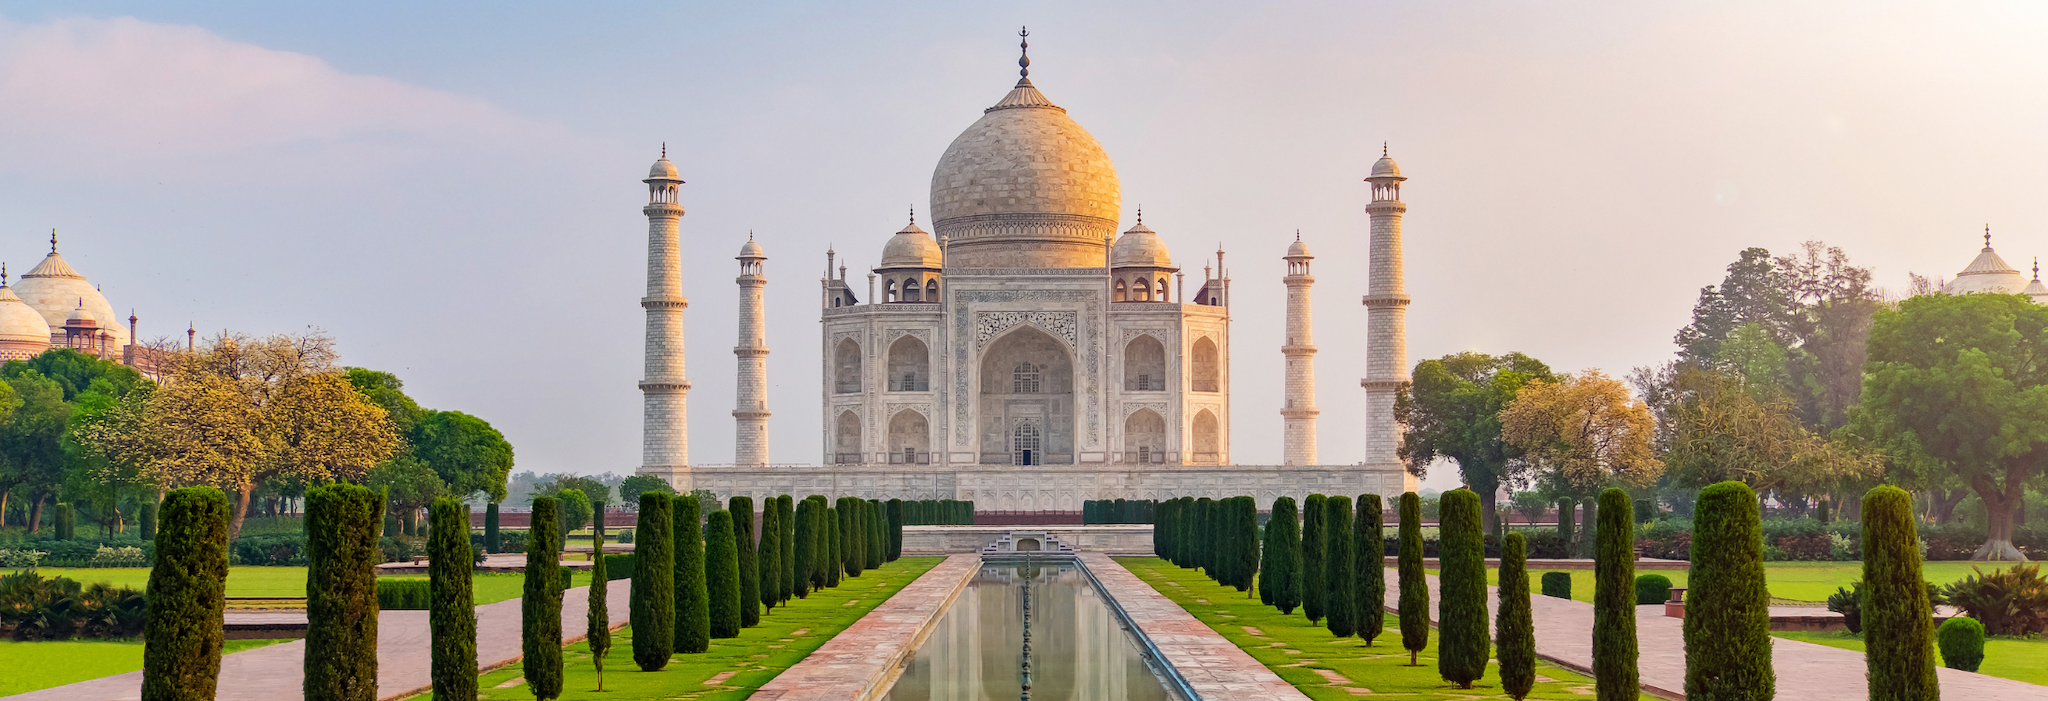 19 facts about Taj Mahal that are stranger than any fiction you’ve read or heard